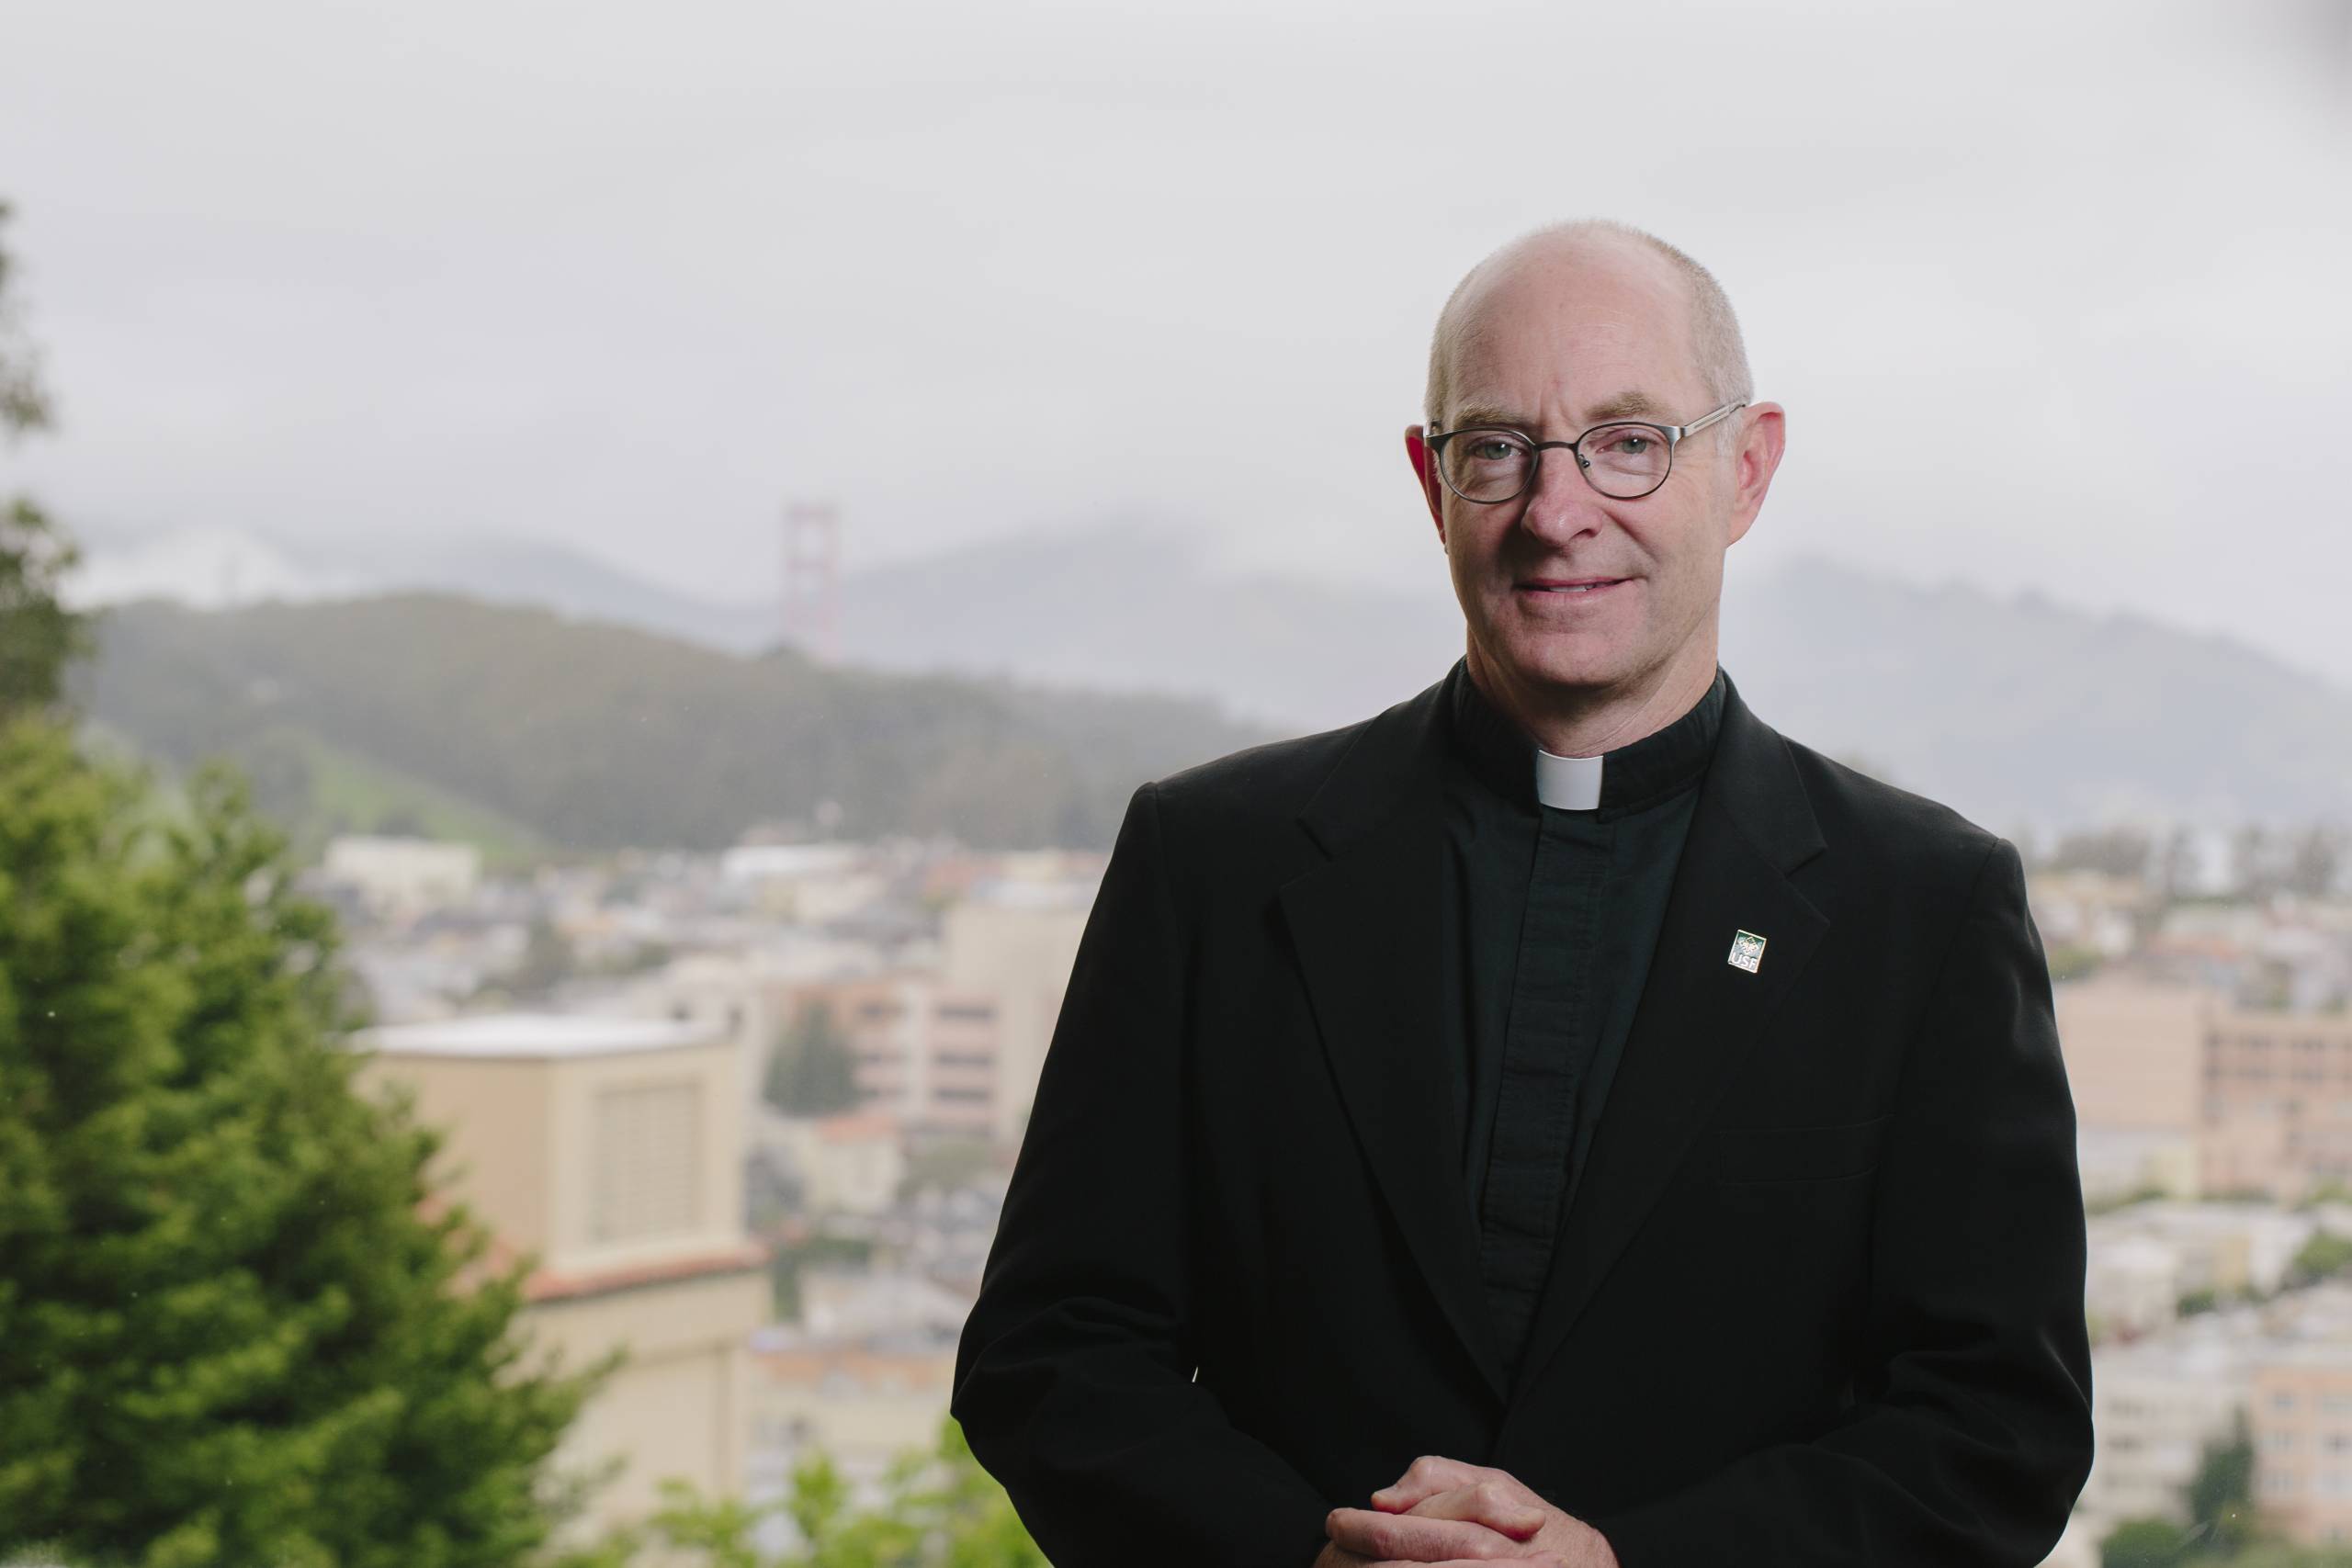 profile of Jesuit reverend with cityscape in background